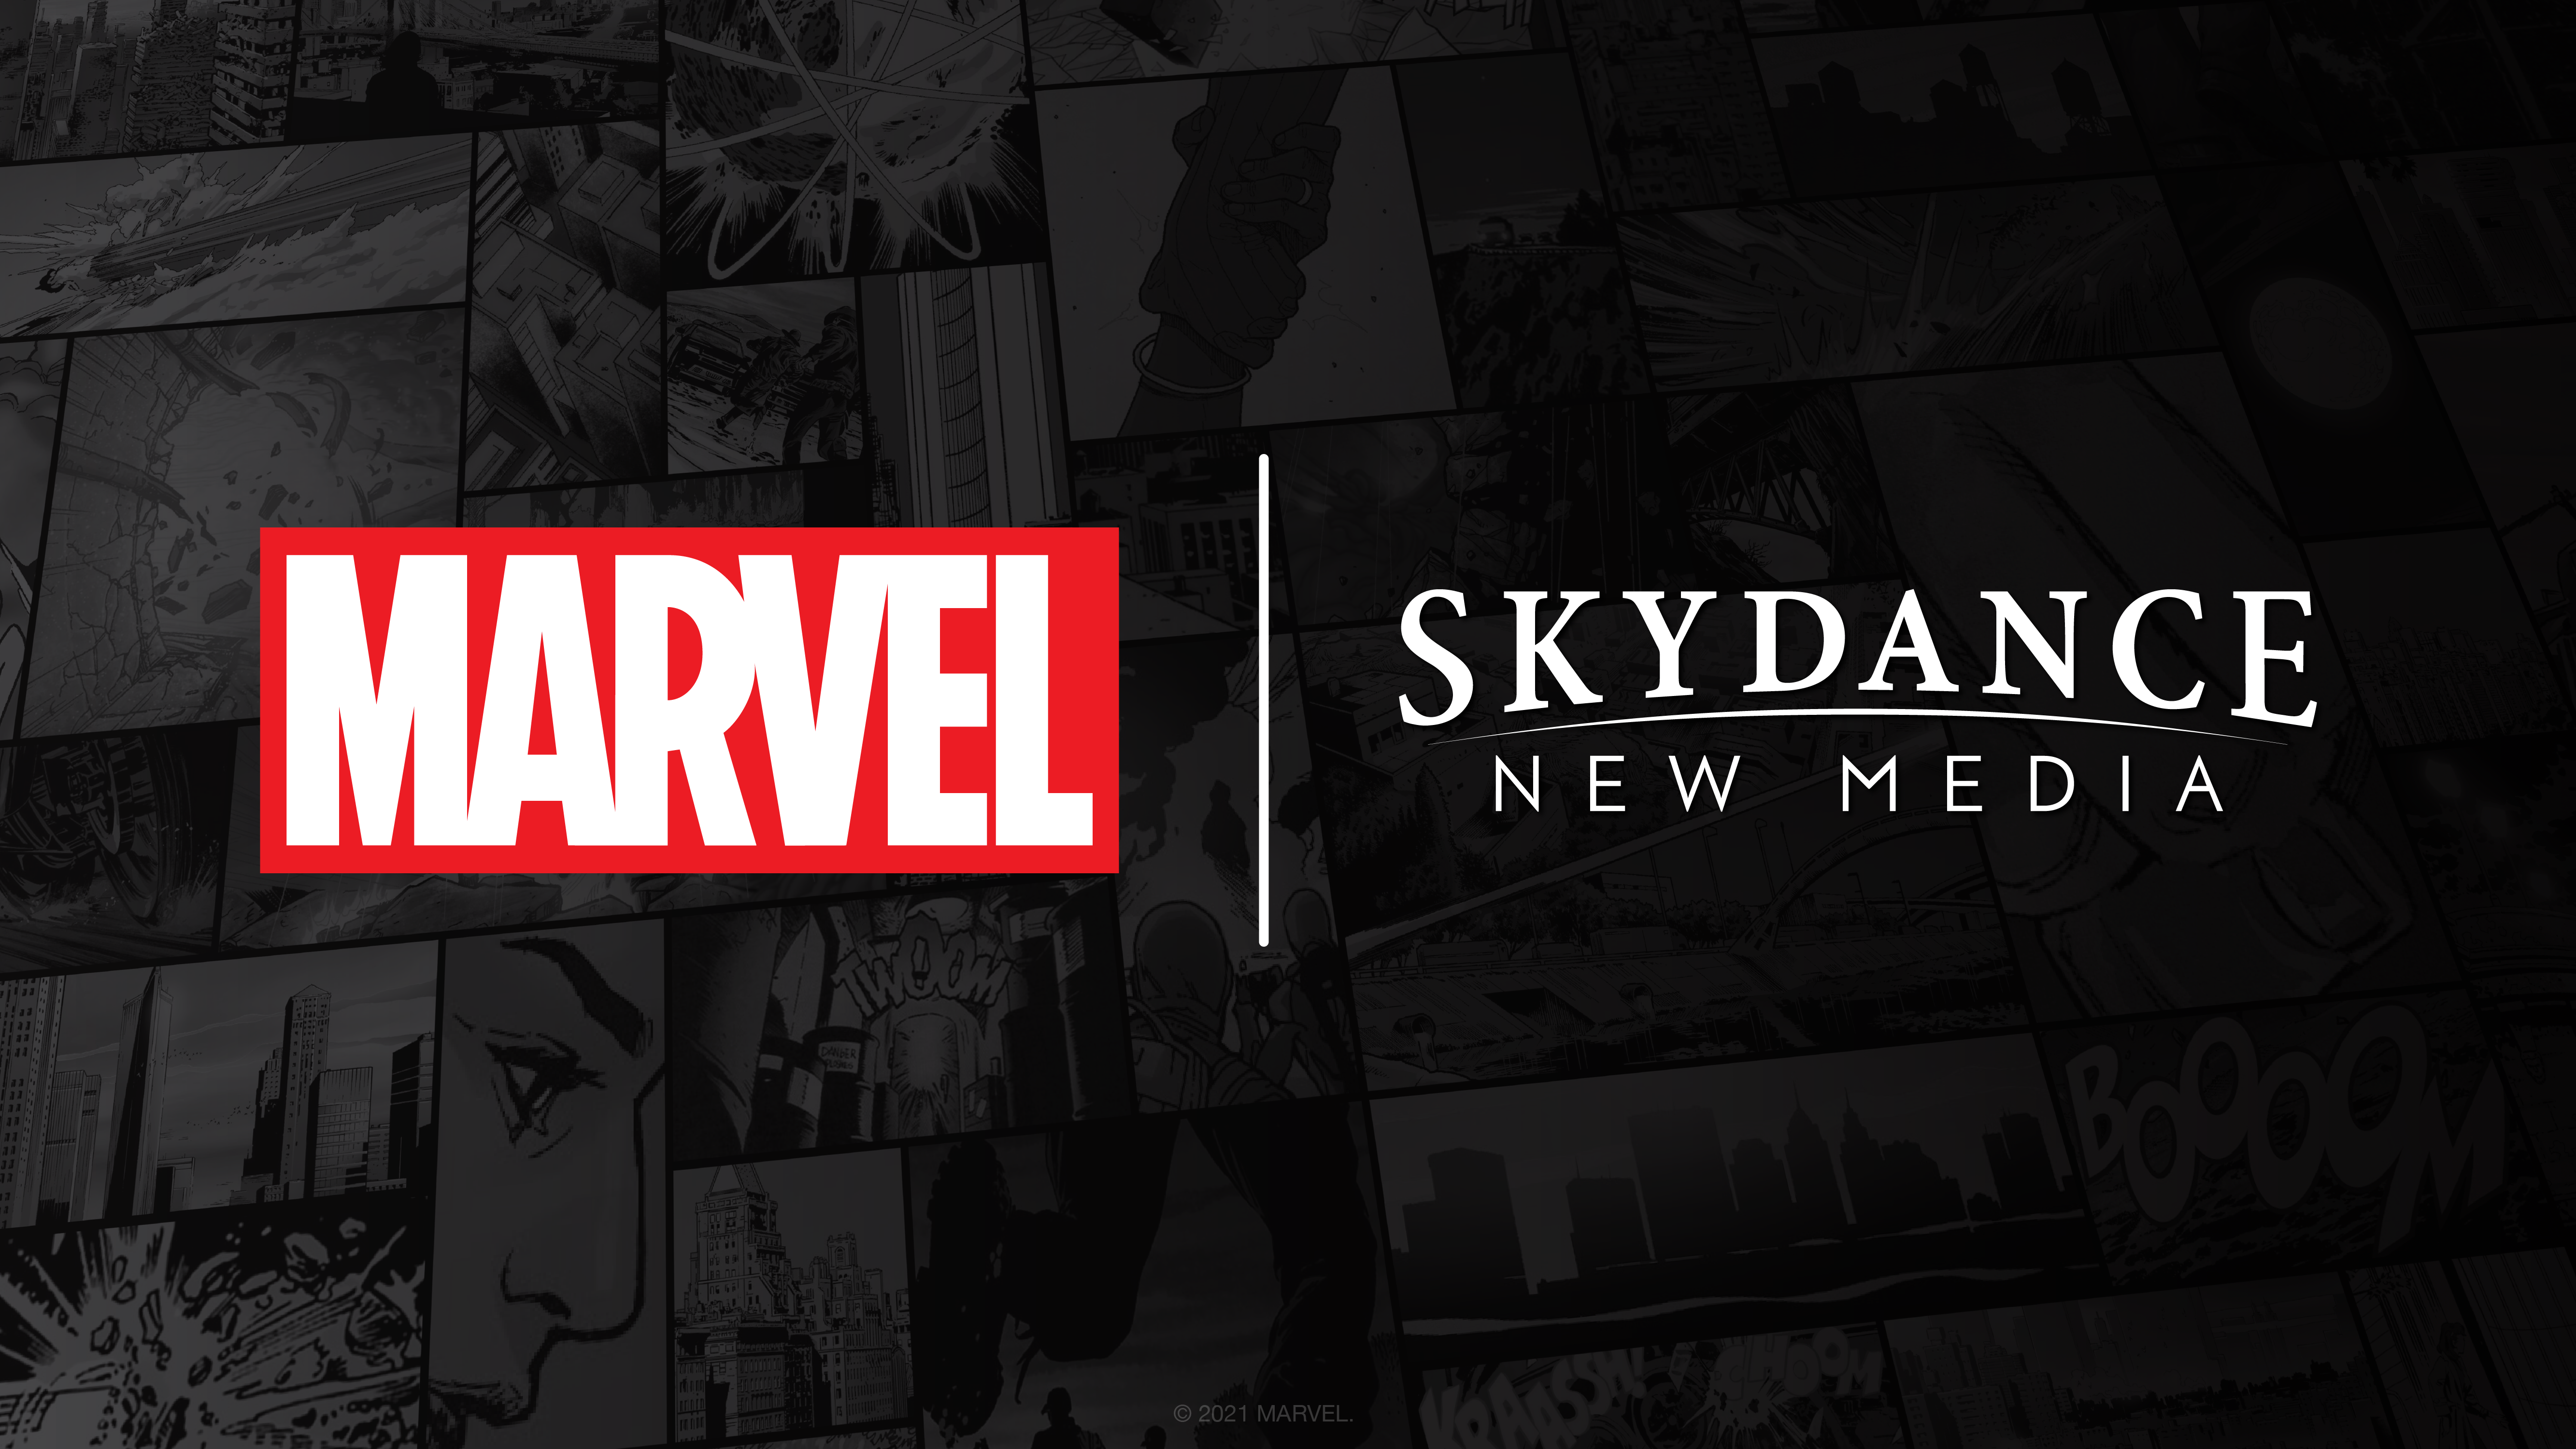 Skydance New Media Joins Forces with Marvel Entertainment to Create an All-New Interactive Title